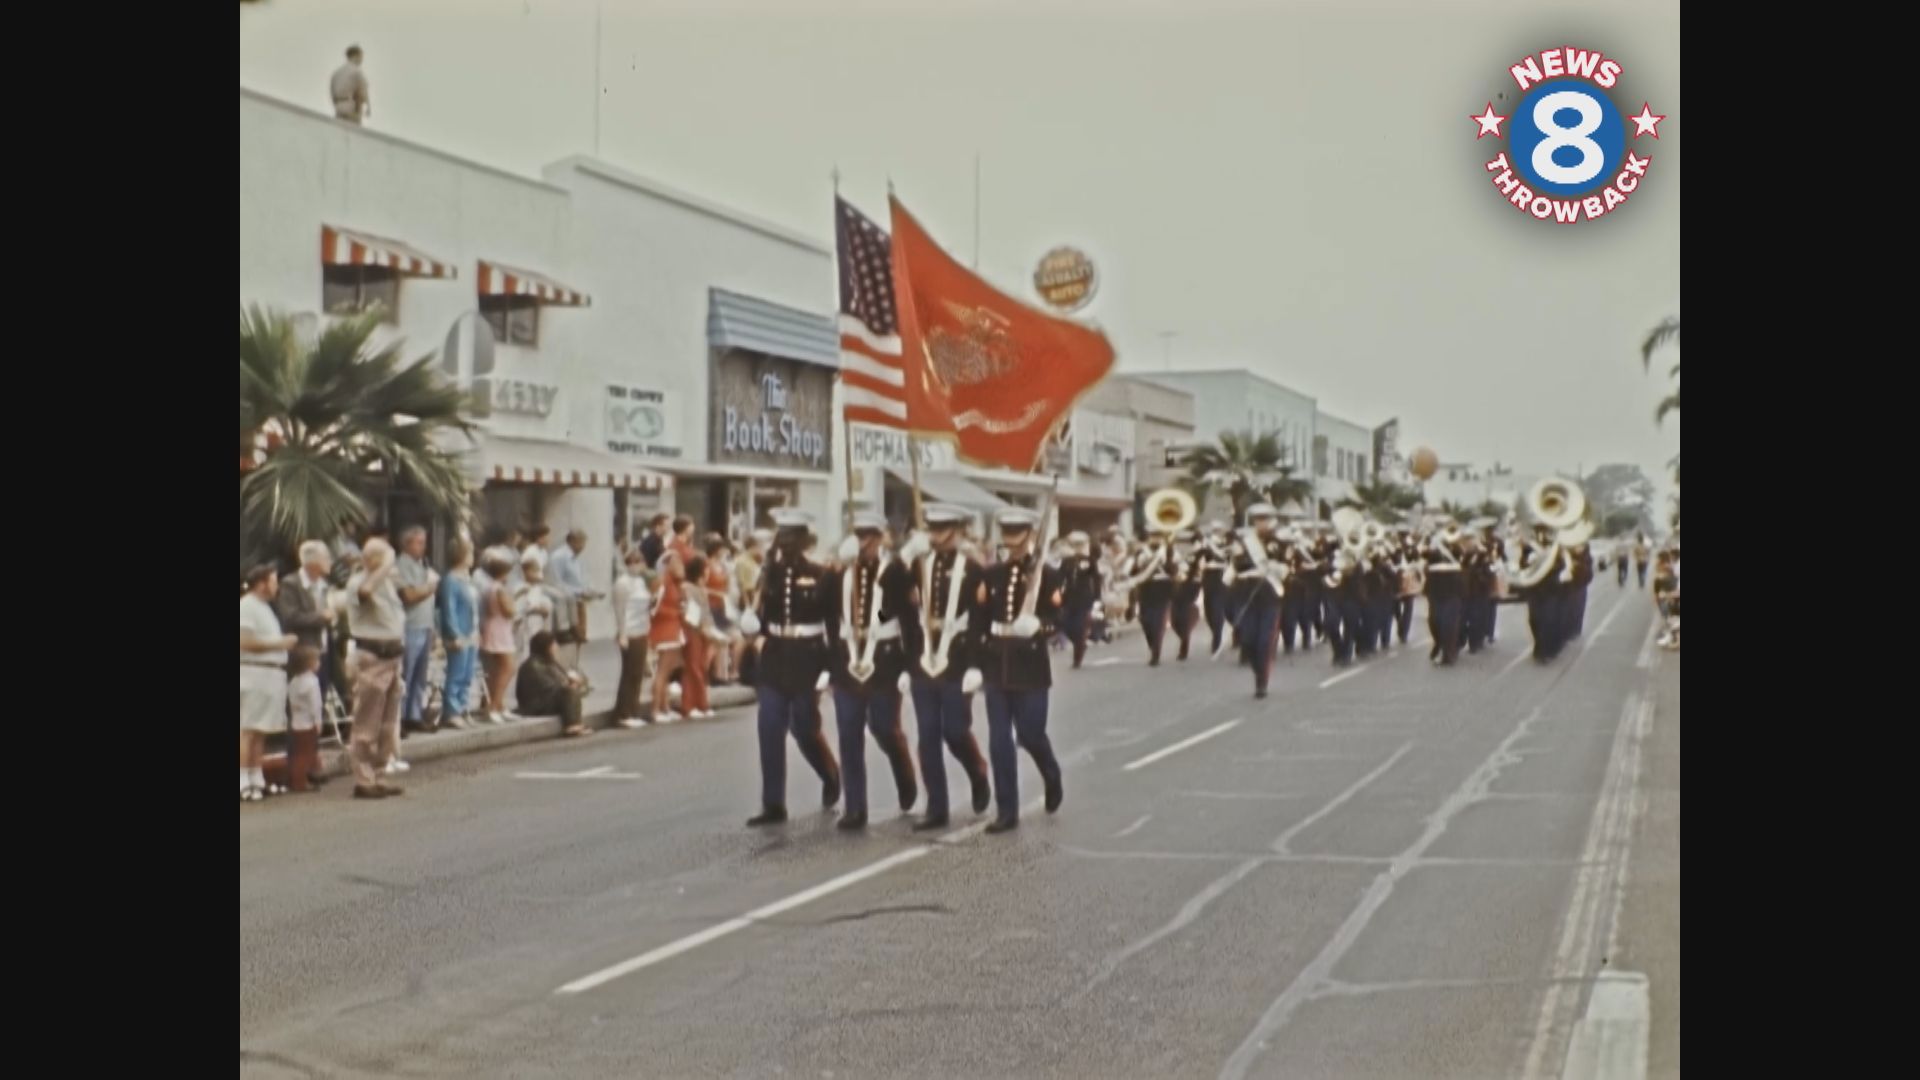 It was an extra special Coronado Fourth of July parade in 1973. Three Vietnam prisoners of war were honored guests.